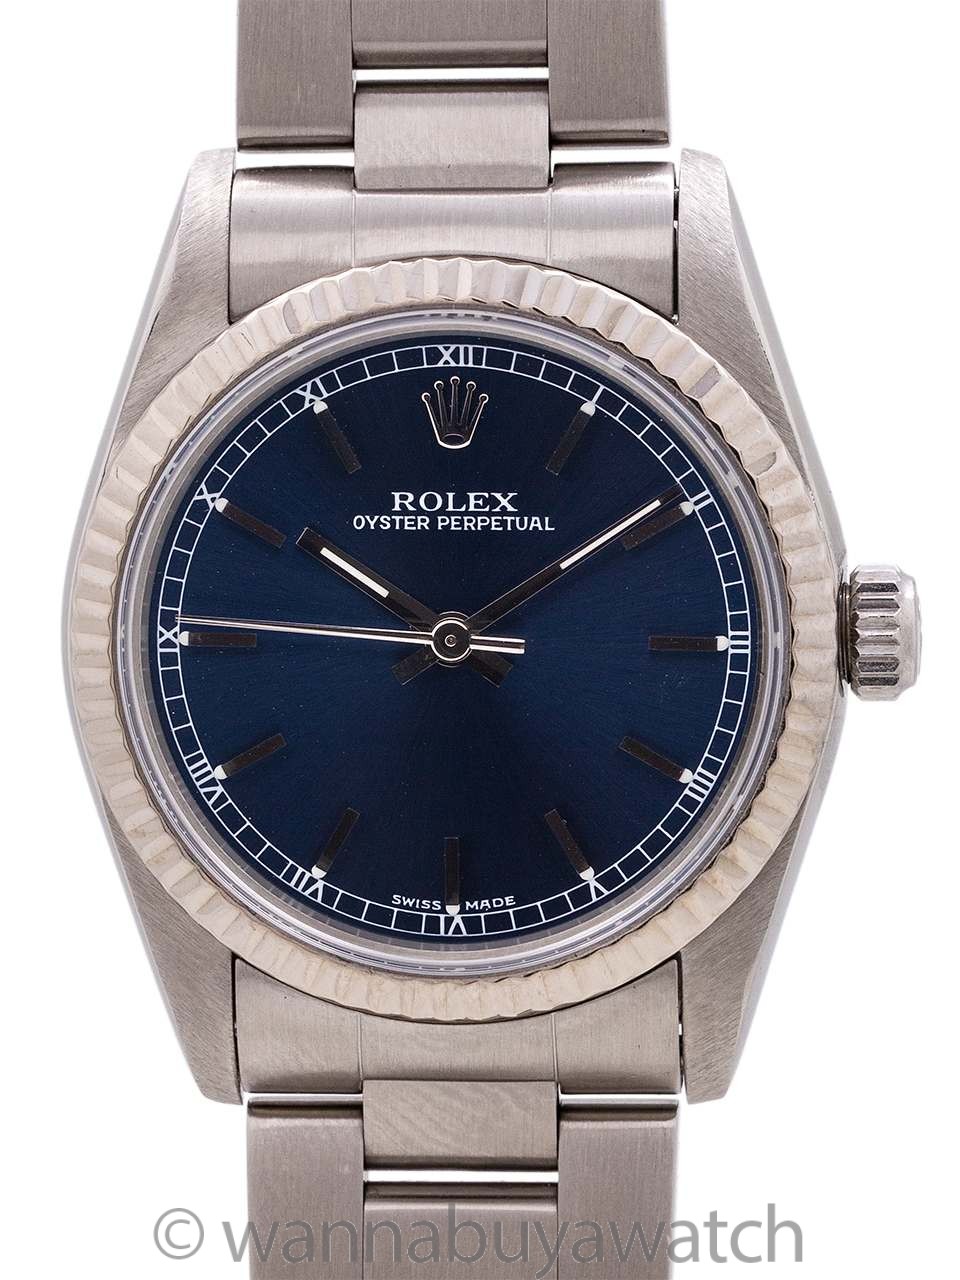 Rolex Midsize Oyster Perpetual ref 